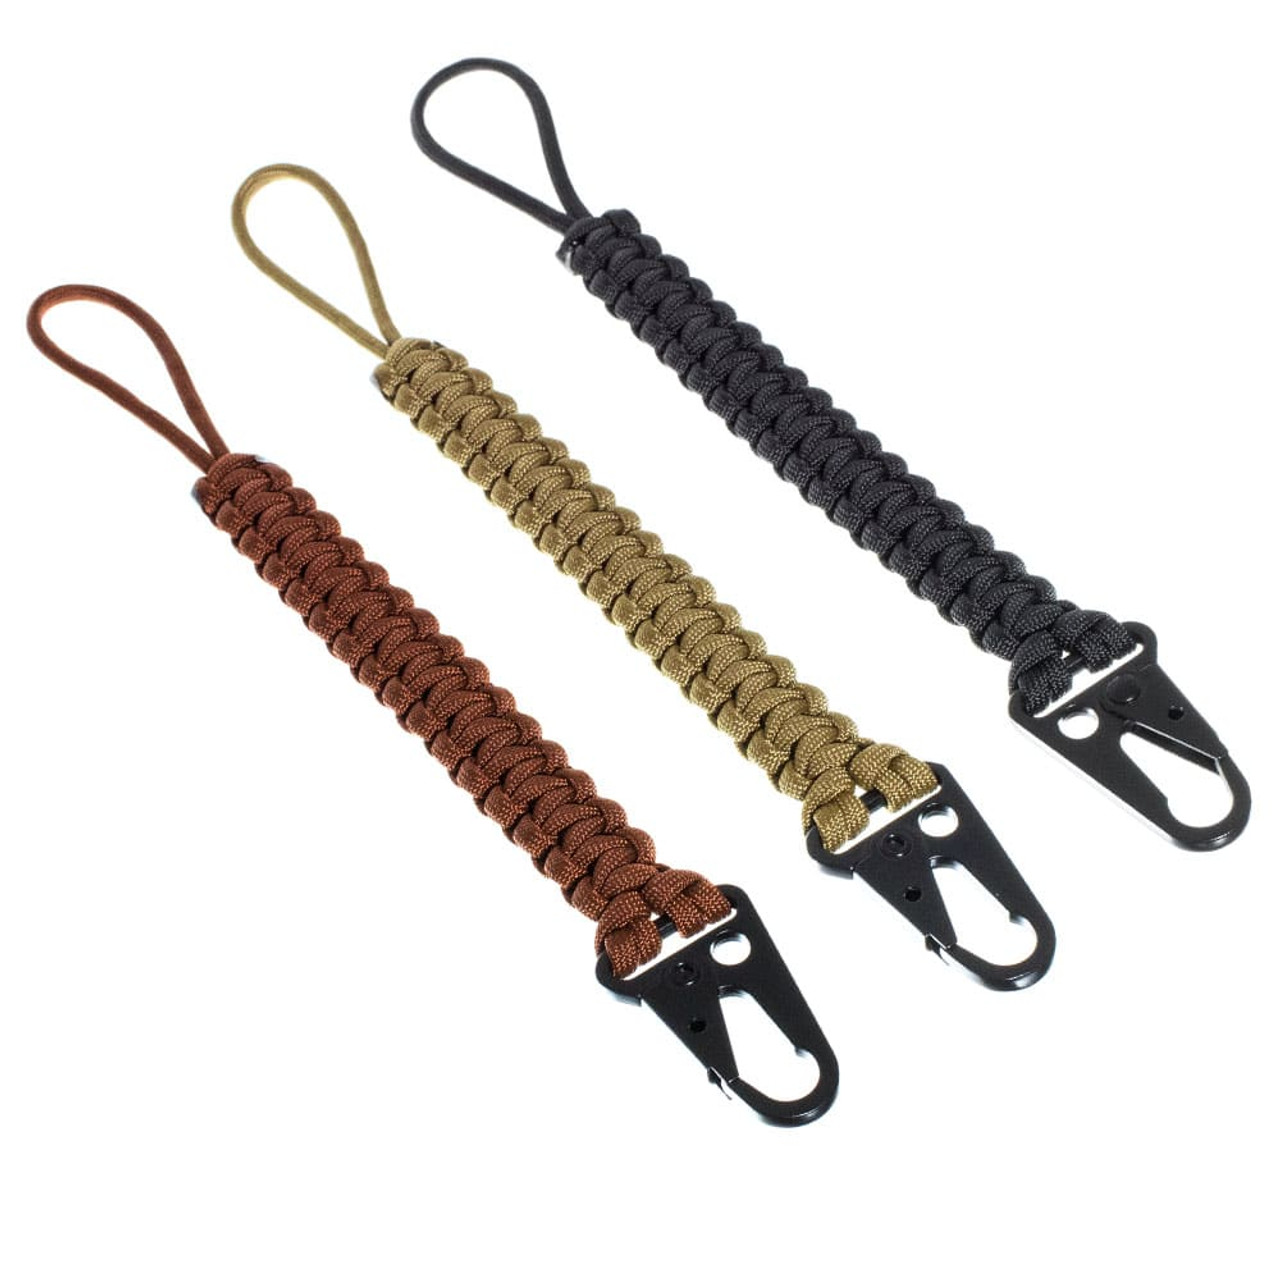 Cobra Weave 6 Tether 10 Of 550 Paracord Outdoor Bunker